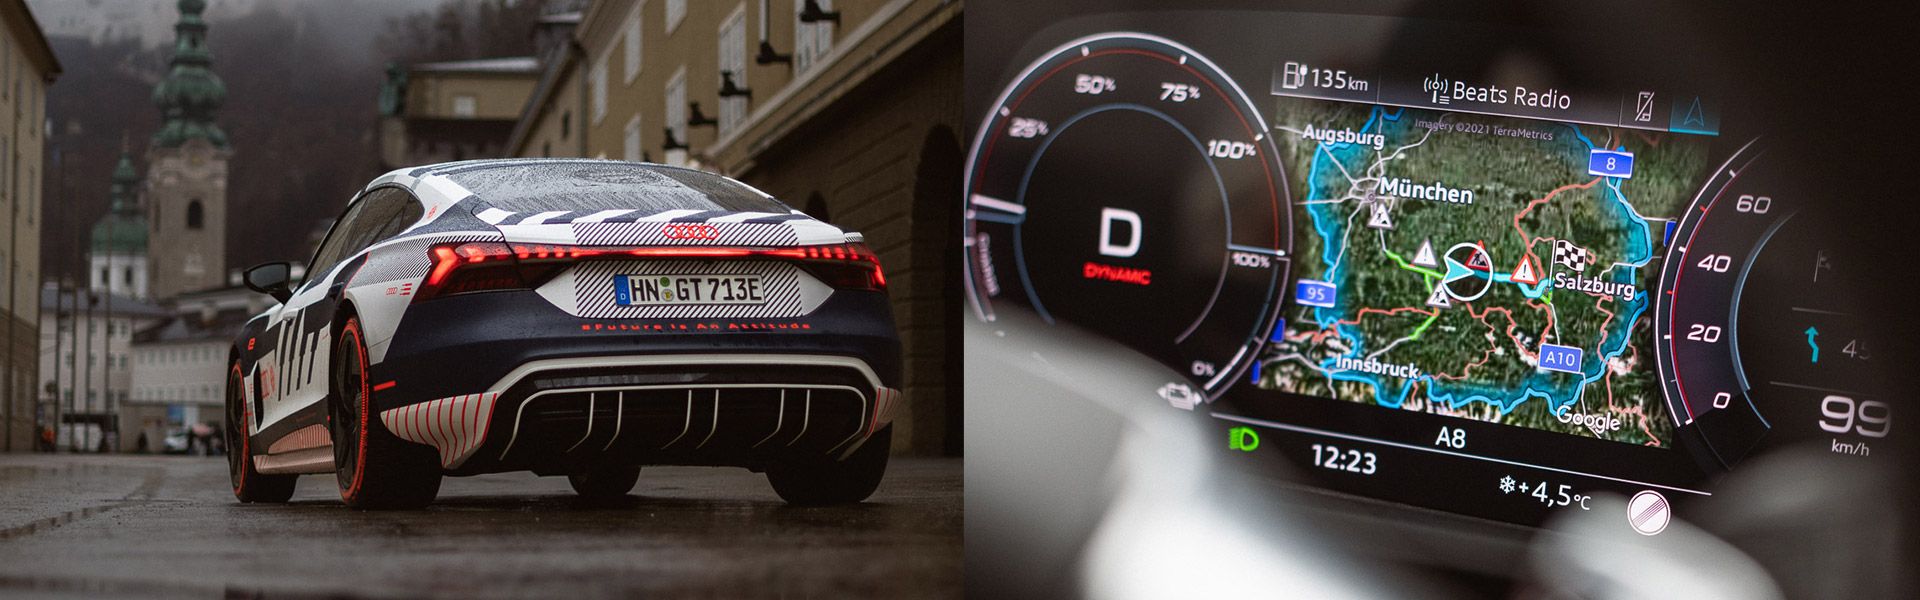 Rearview of the Audi RS e-tron GT next to an image of the Munich Salzburg route on the navigation system